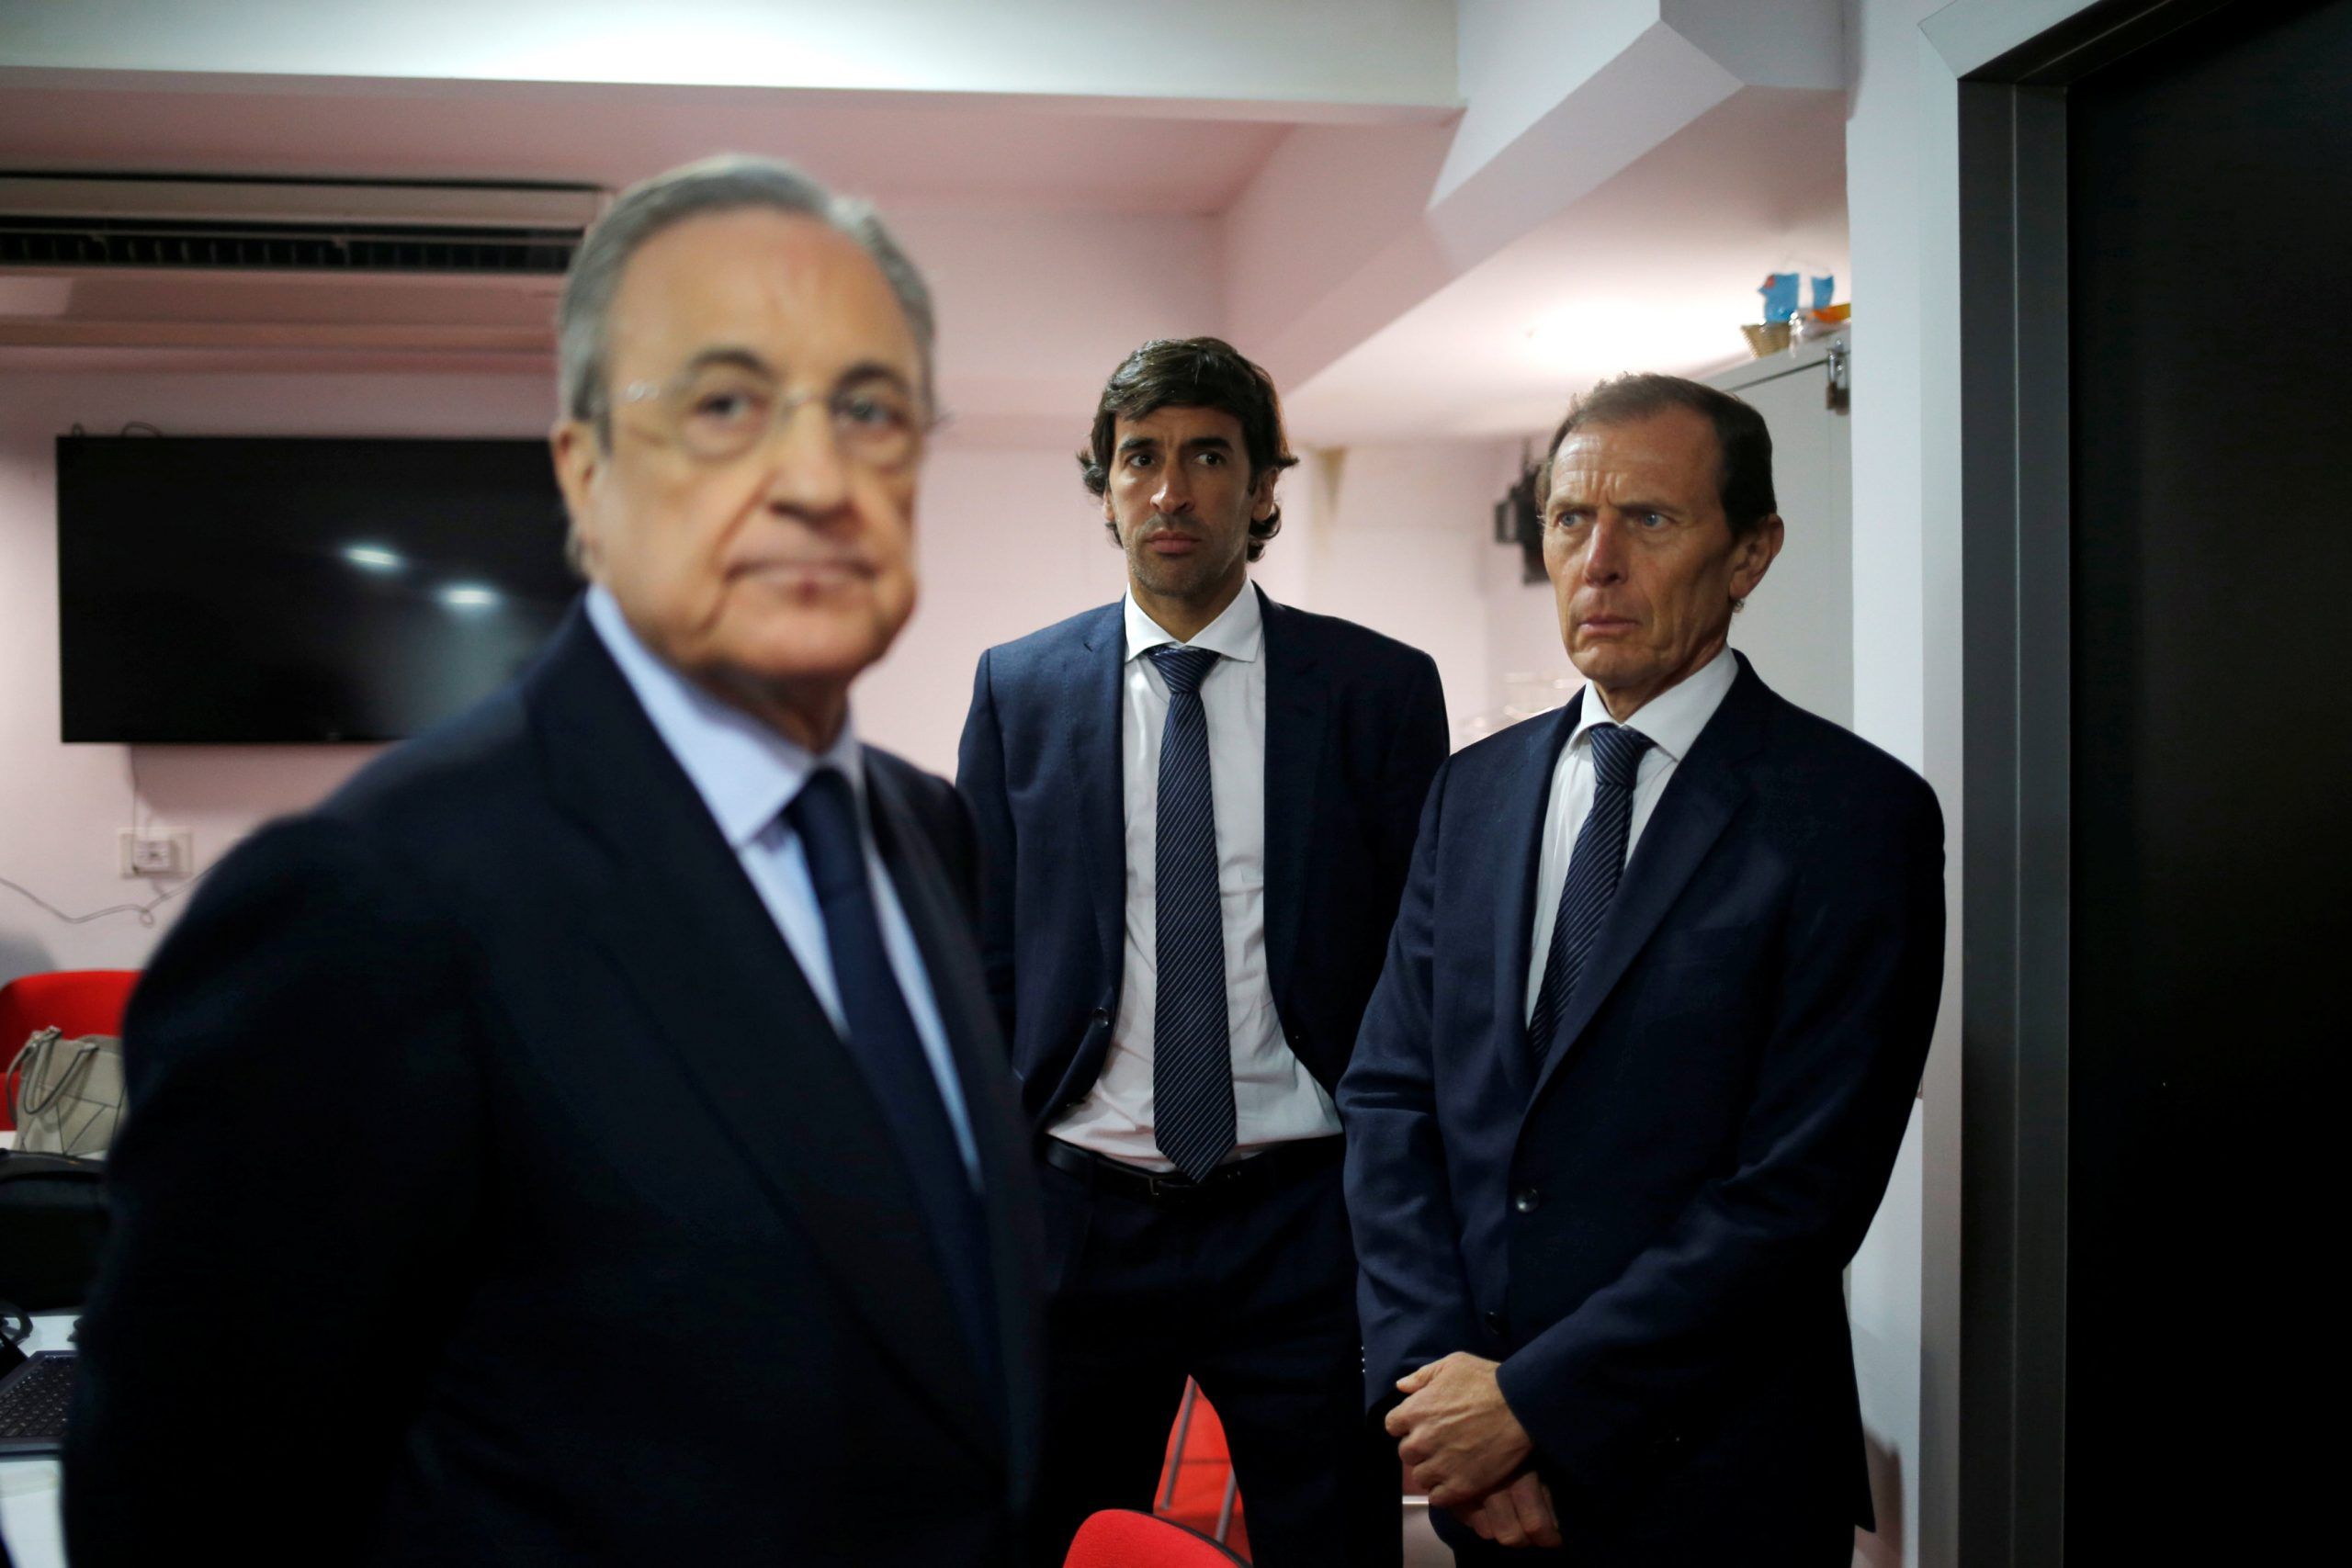 Real Madrid president Florentino Perez, former Real Madrid footballer Raul Gonzalez and Real Madrid Director of Institutional Relations Emilio Butragueno attend the wake of Spanish footballer Jose Antonio Reyes, who died aged 35 in a traffic accident, at Ramon Sanchez-Pizjuan stadium in Seville, Spain, June 2, 2019. REUTERS/Jon Nazca